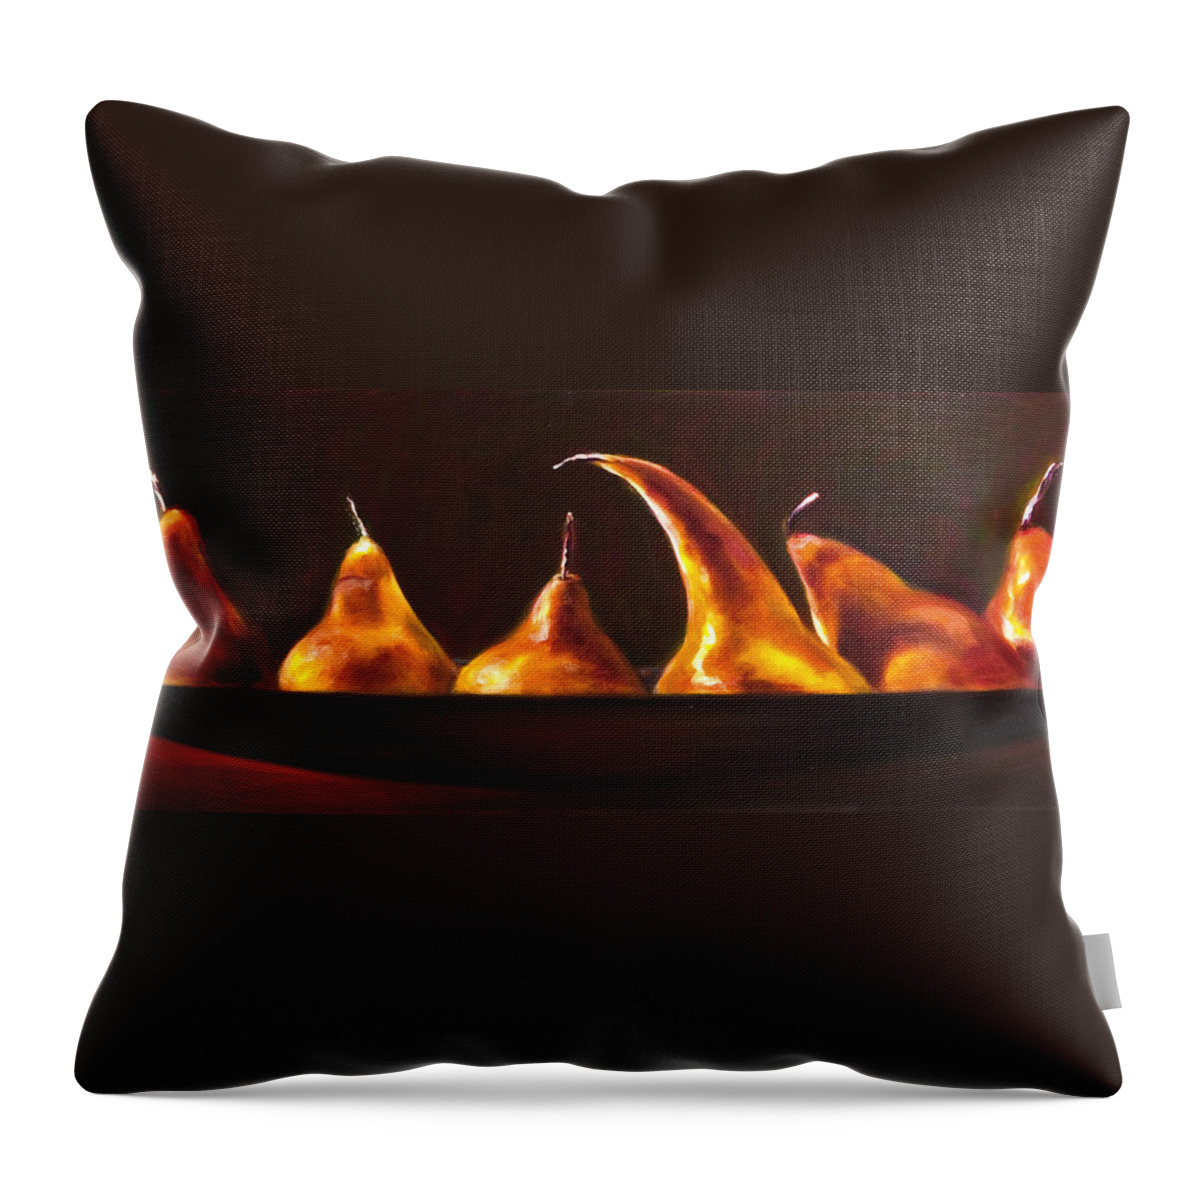 Pears Throw Pillow featuring the painting All Aboard by Shannon Grissom